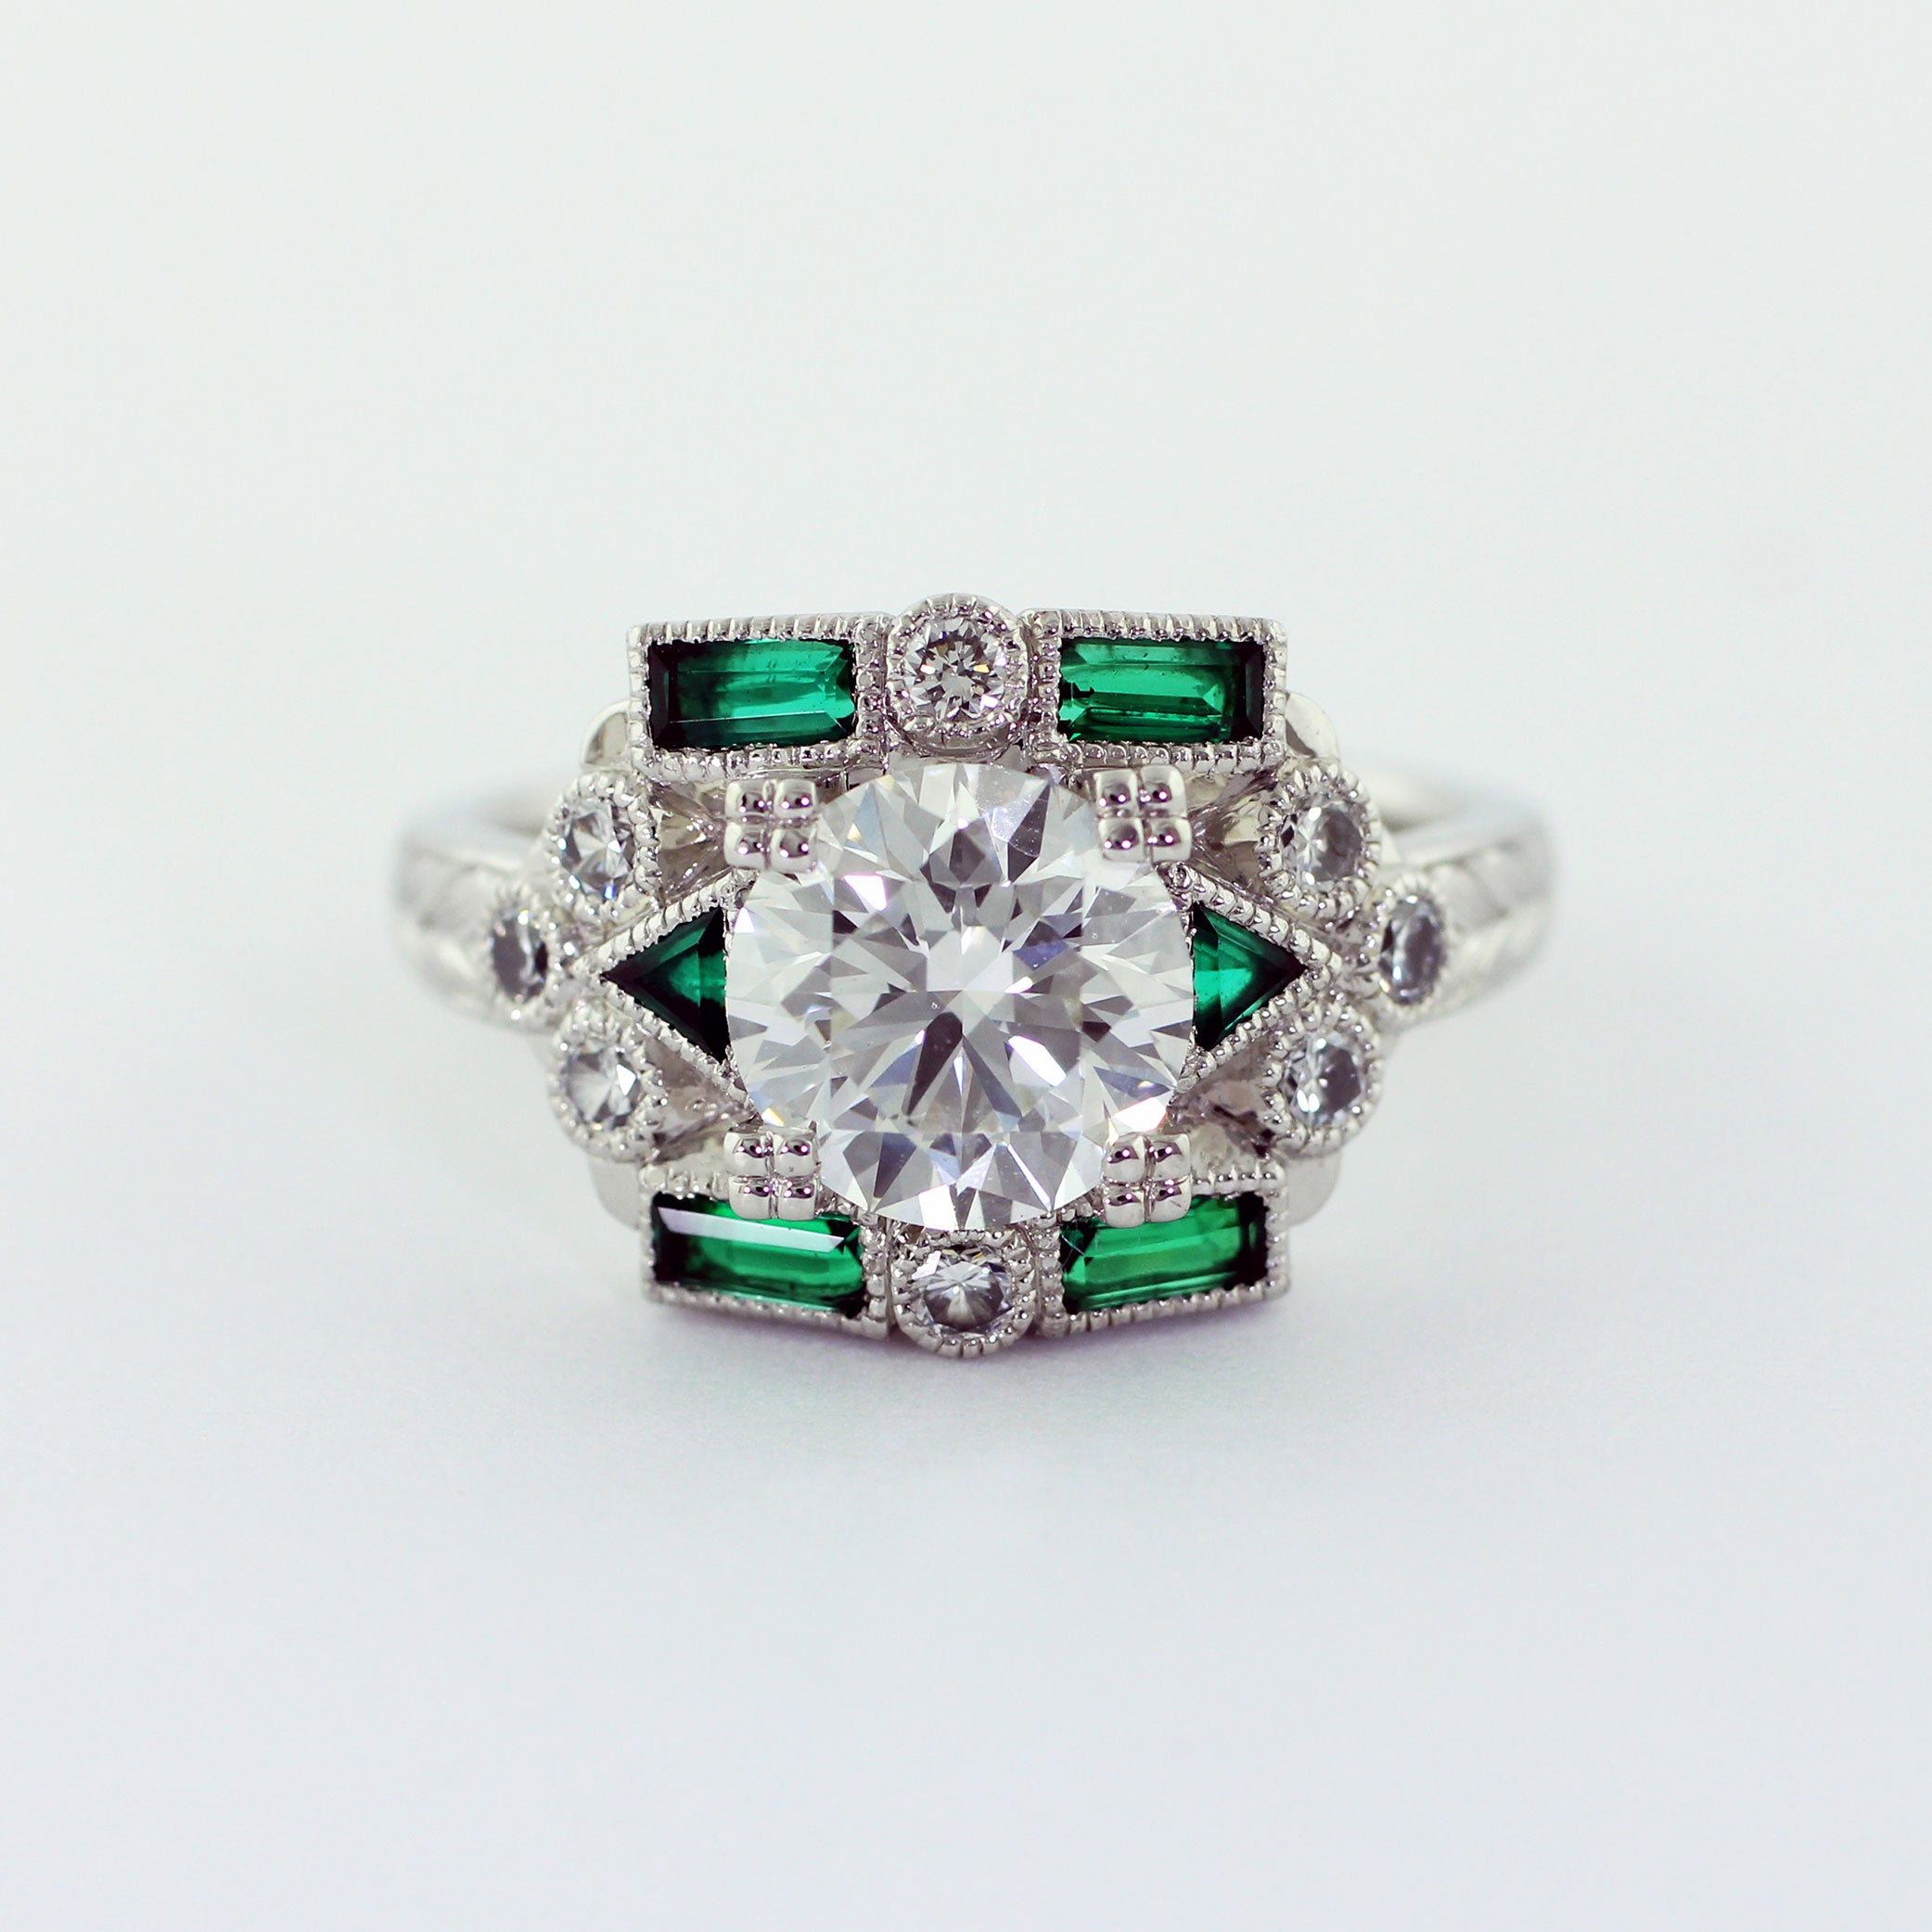 Custom Art Deco platinum ring with a prong-set 2.01ct round brilliant center diamond. The flat top shank features two triangular green emeralds, four baguette green emeralds, eight 2.2mm diamond melee, milgrain detailing, and an engraved wheat leaf pattern, lending a touch of vintage charm.